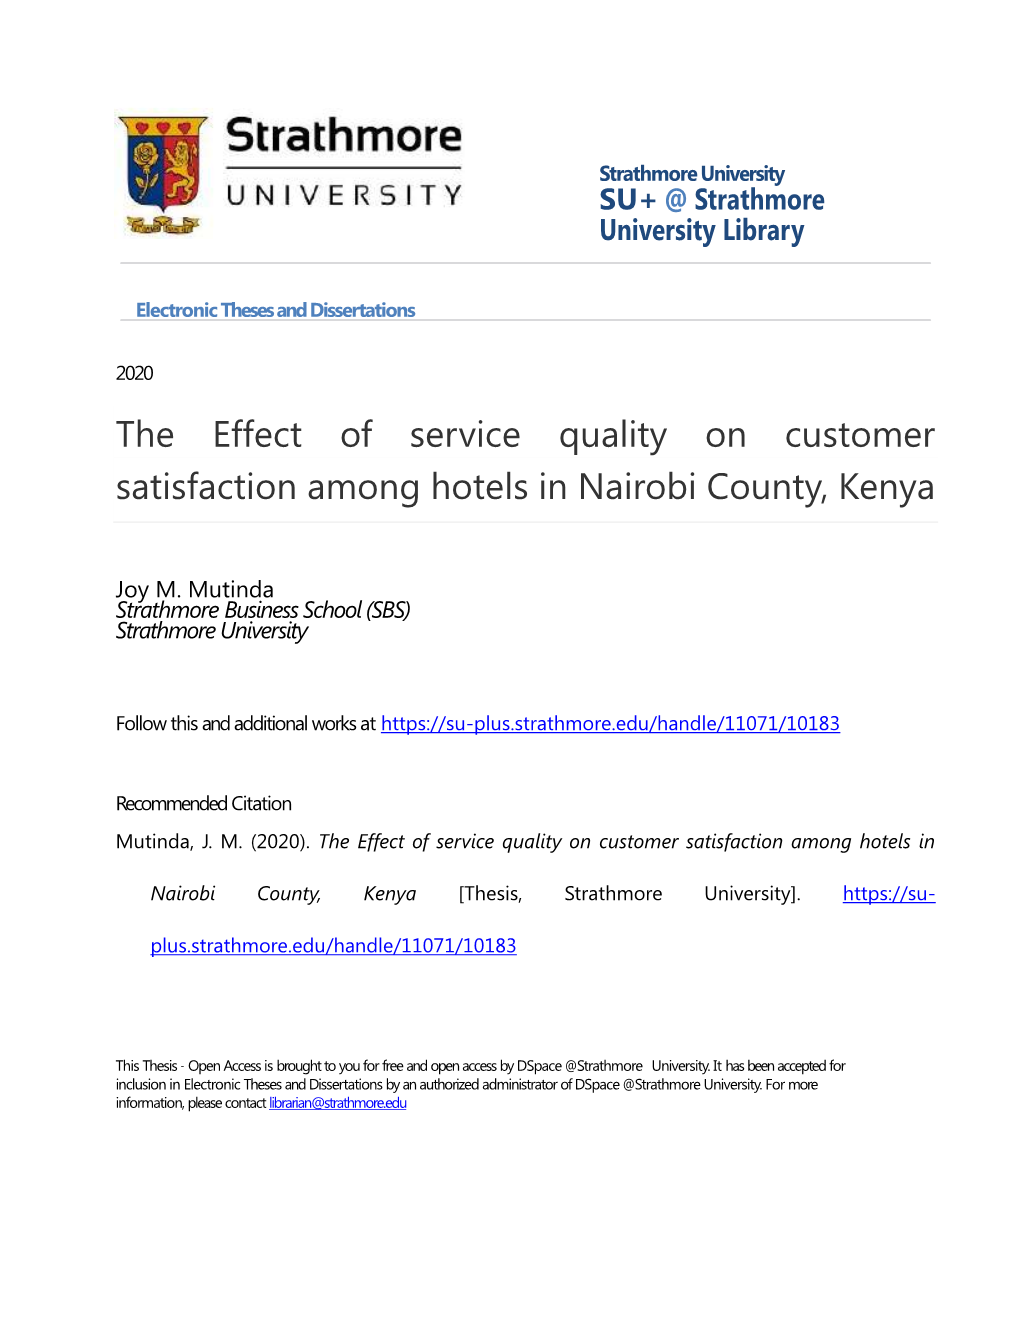 The Effect of Service Quality on Customer Satisfaction Among Hotels in Nairobi County, Kenya